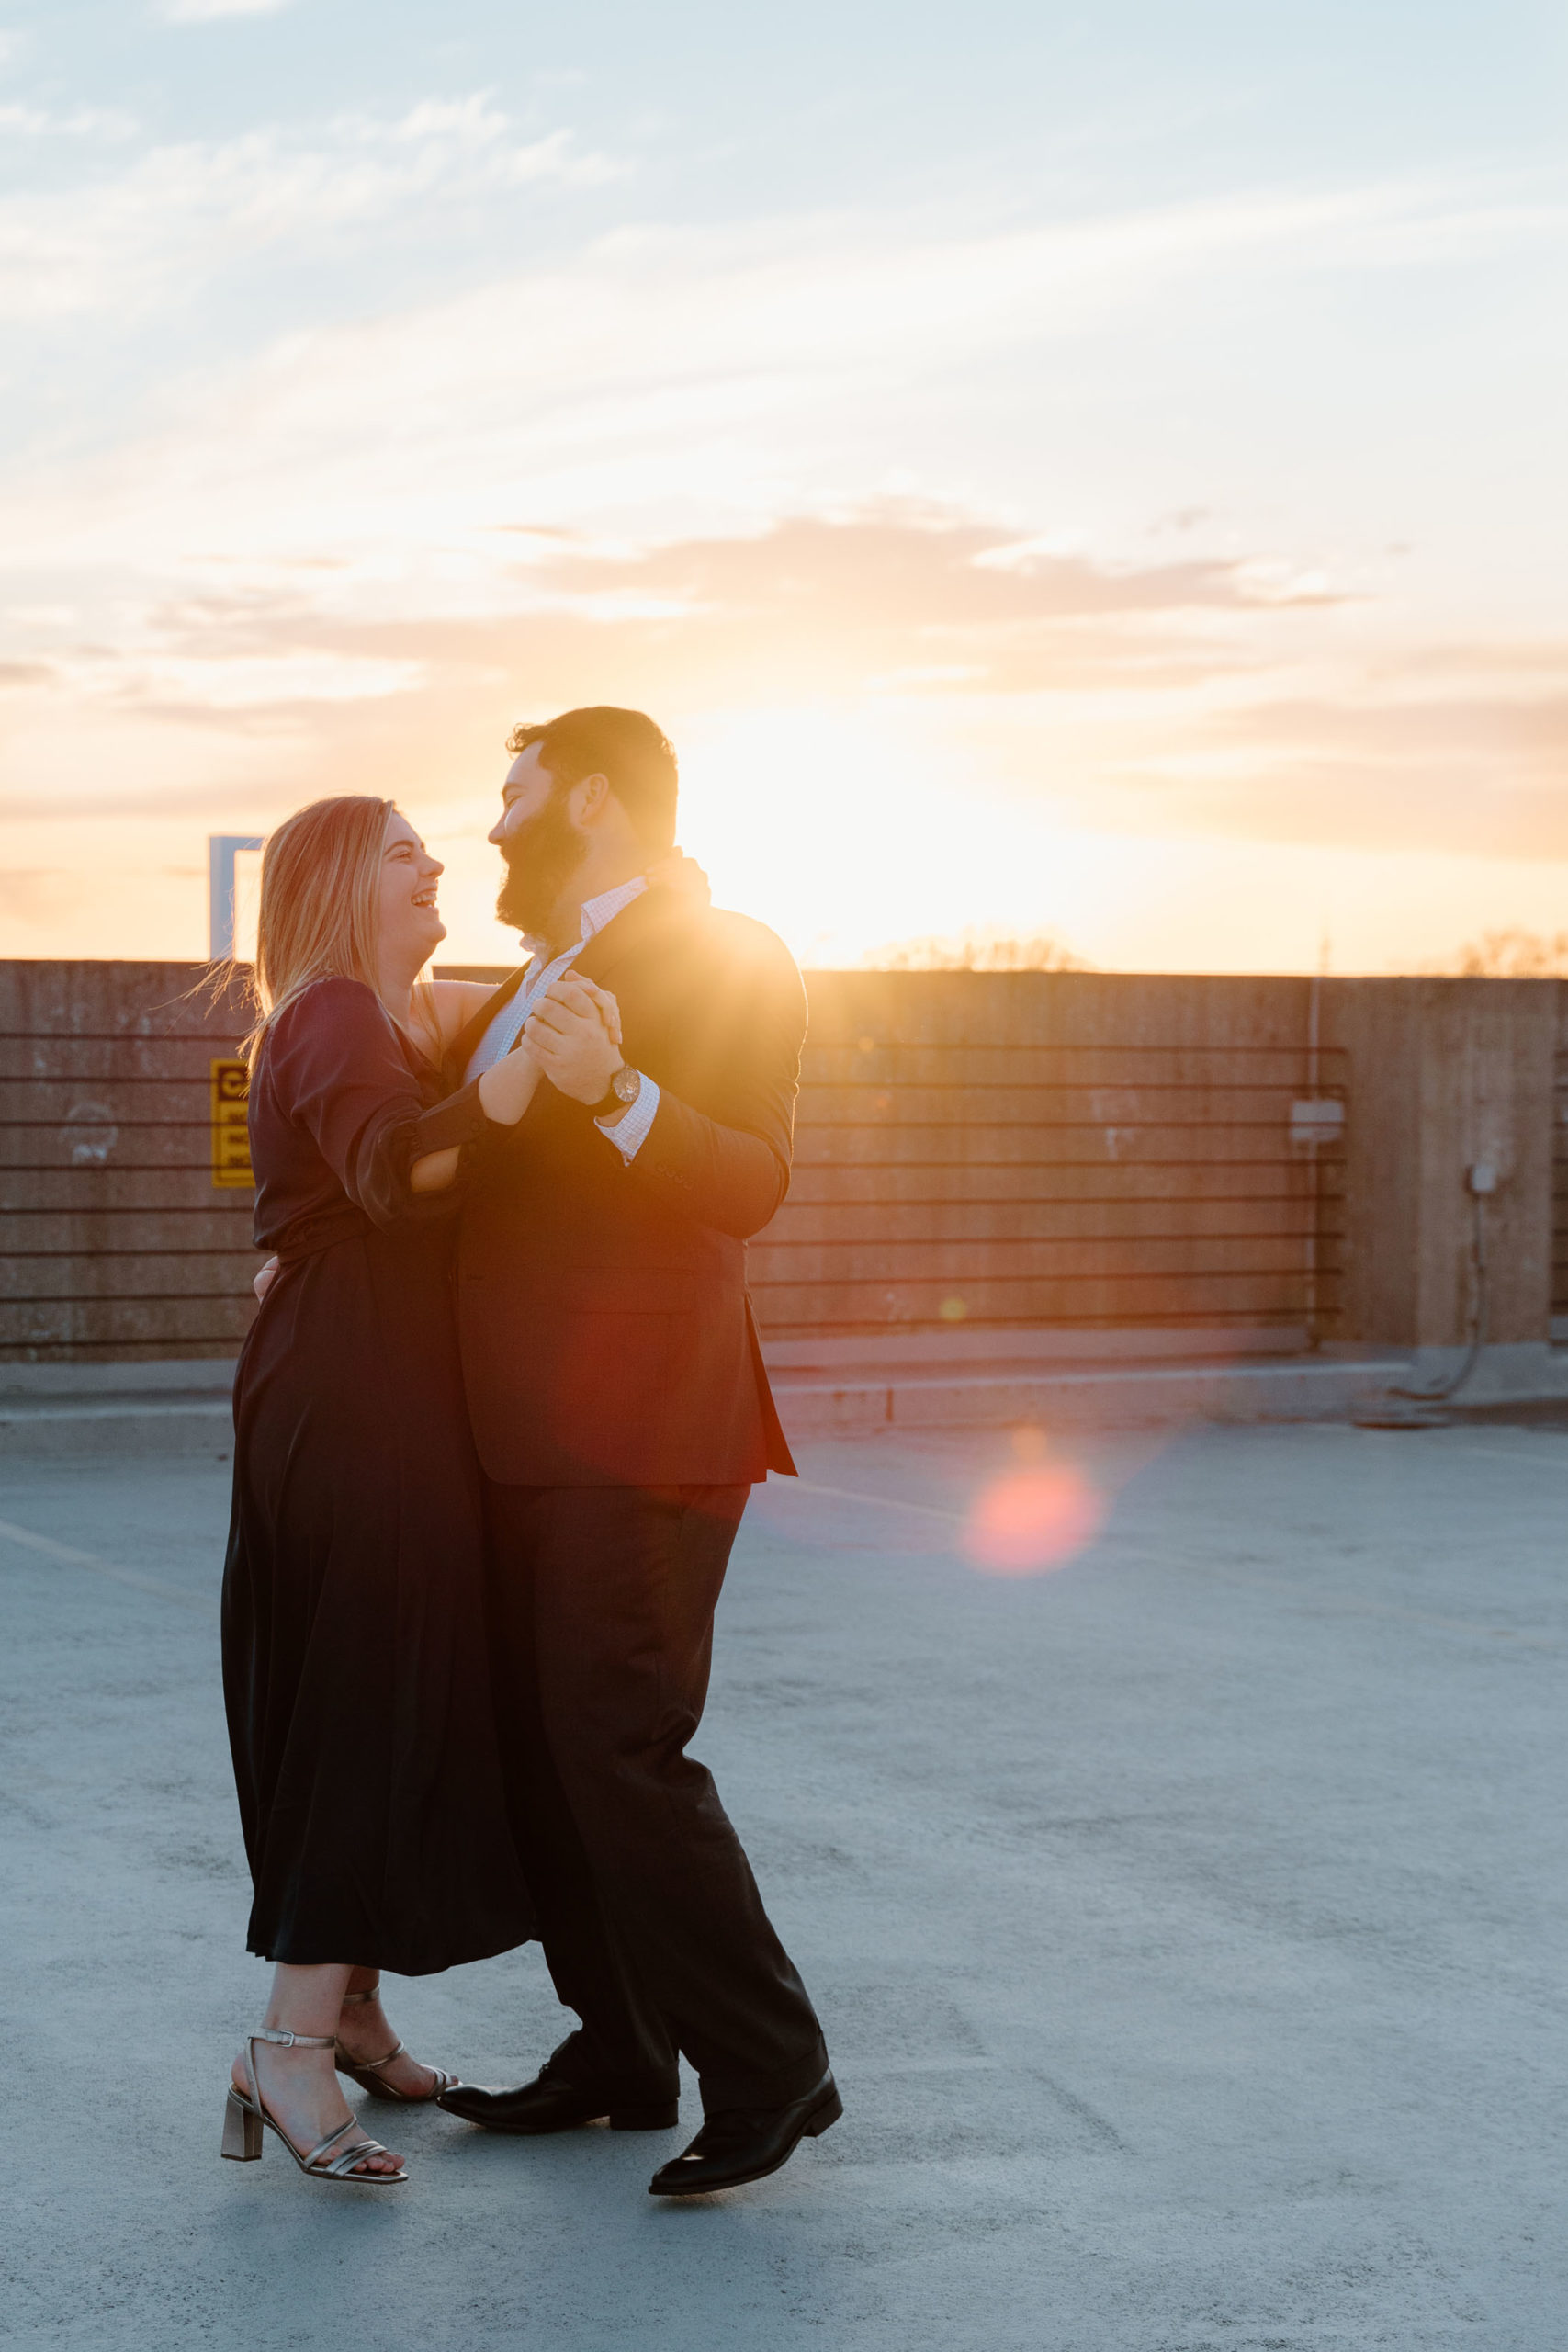 Uptown Charlotte Engagement Photos with Skyline Views